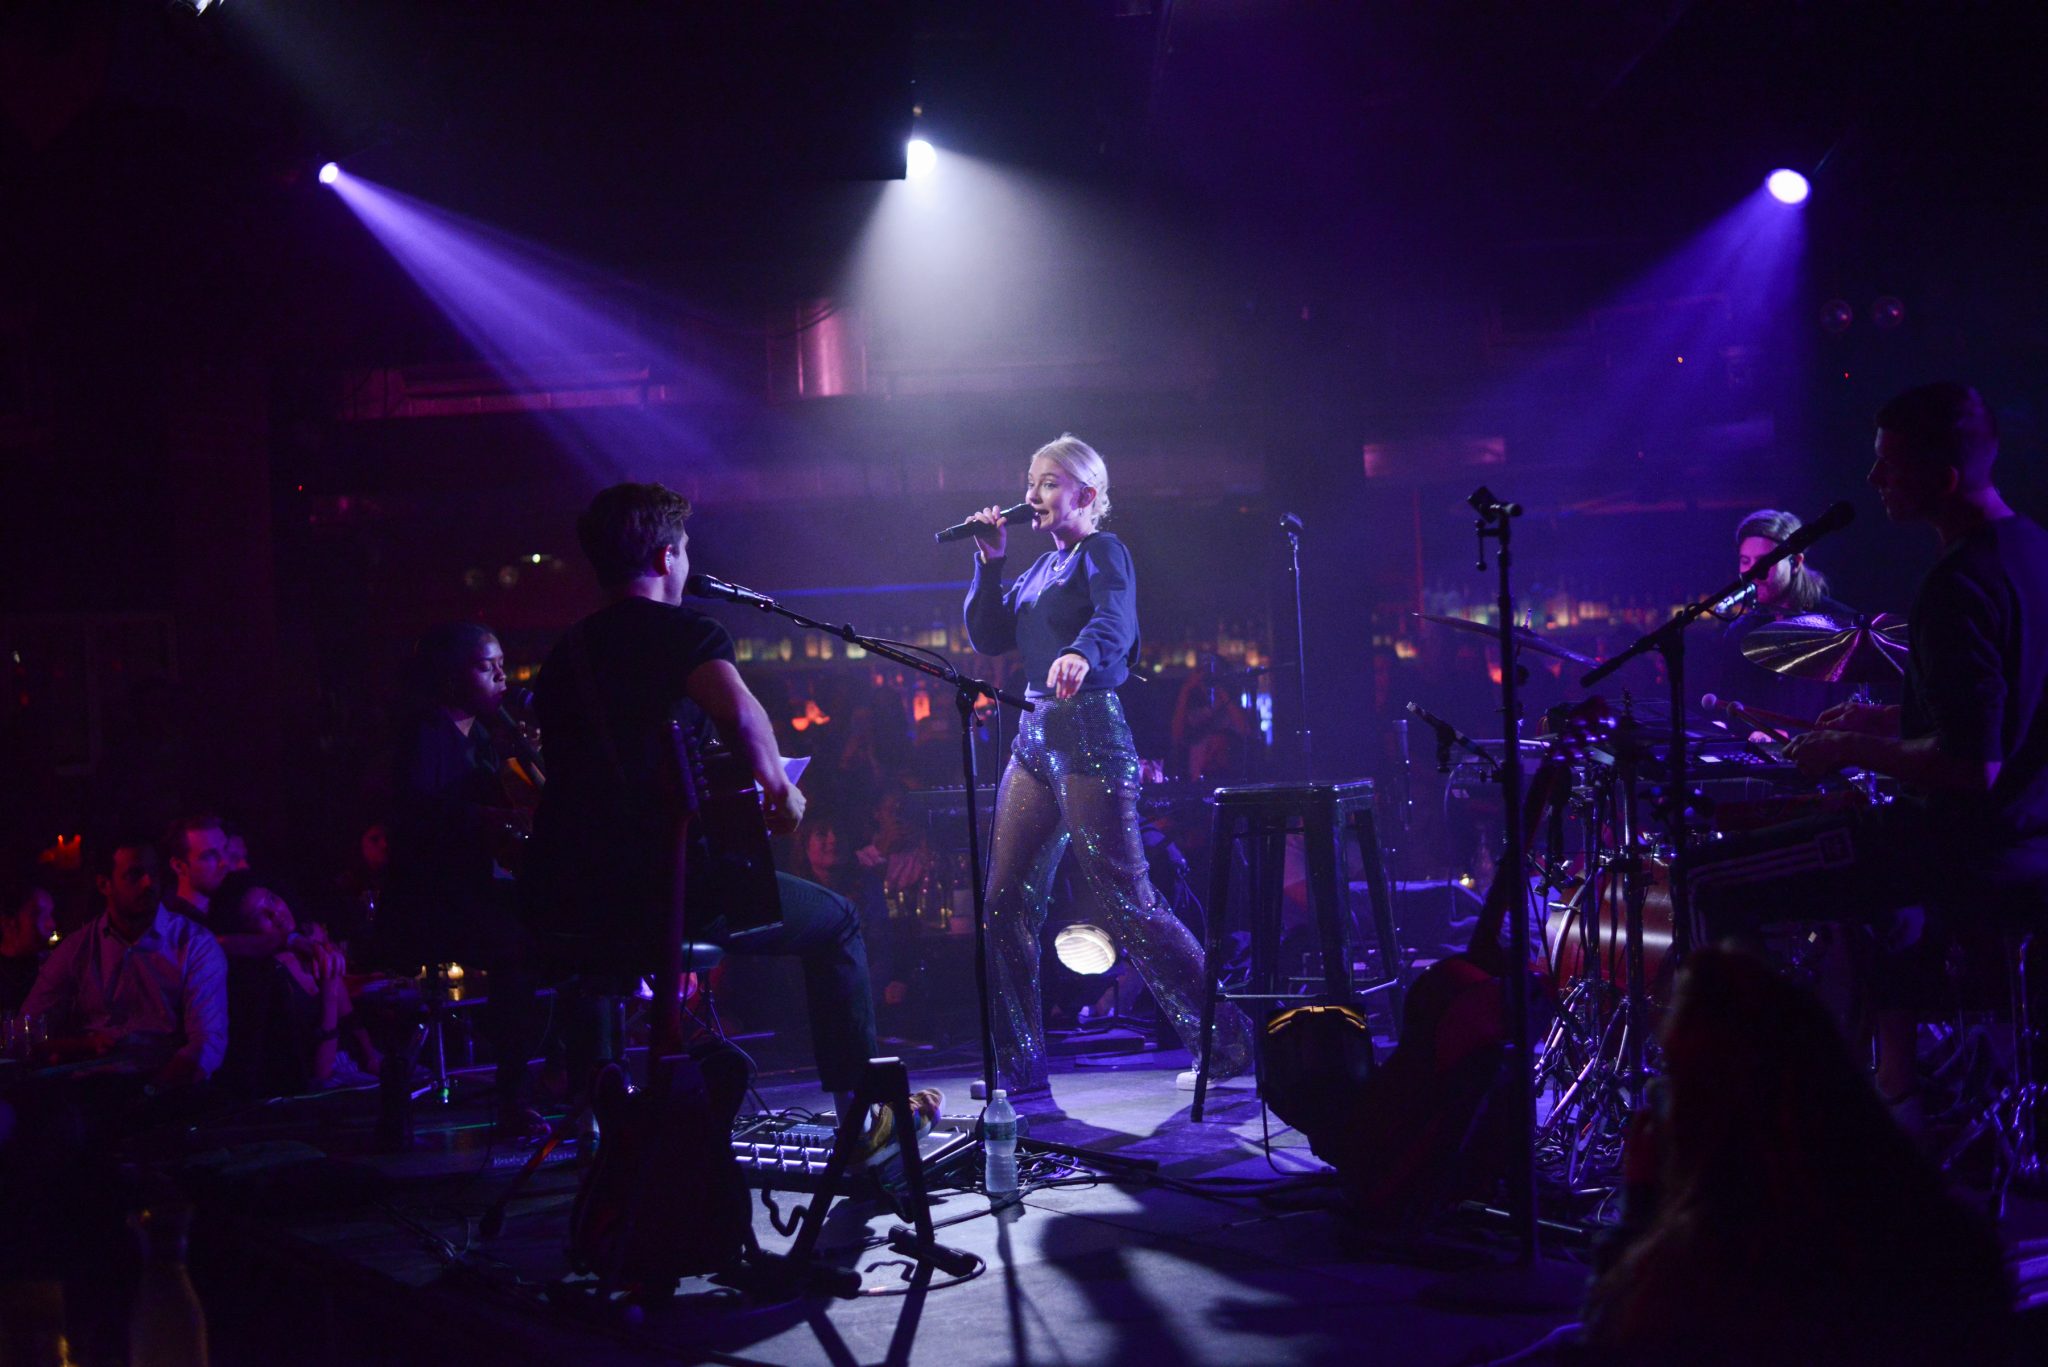  Astrid S performed a show on her Stripped Down Tour at Le Poisson Rouge in New York City on Tuesday, September 17, 2019. Photograph by Casey Kelbaugh